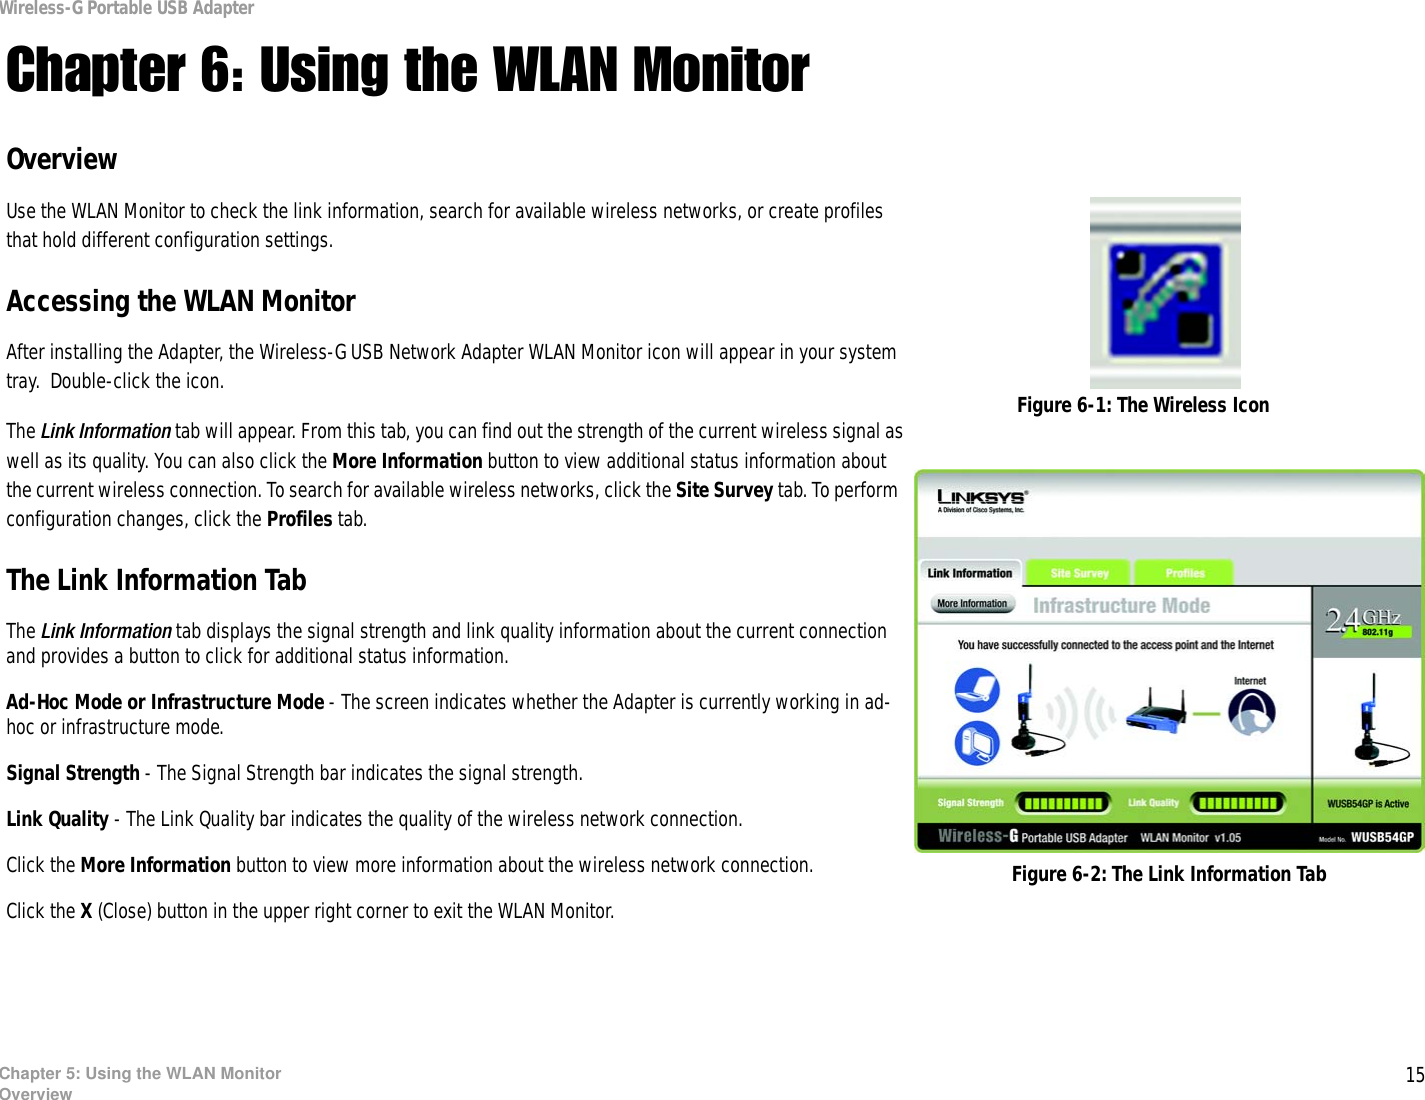 15Chapter 5: Using the WLAN MonitorOverviewWireless-G Portable USB AdapterChapter 6: Using the WLAN MonitorOverviewUse the WLAN Monitor to check the link information, search for available wireless networks, or create profiles that hold different configuration settings.Accessing the WLAN MonitorAfter installing the Adapter, the Wireless-G USB Network Adapter WLAN Monitor icon will appear in your system tray.  Double-click the icon.The Link Information tab will appear. From this tab, you can find out the strength of the current wireless signal as well as its quality. You can also click the More Information button to view additional status information about the current wireless connection. To search for available wireless networks, click the Site Survey tab. To perform configuration changes, click the Profiles tab.The Link Information TabThe Link Information tab displays the signal strength and link quality information about the current connection and provides a button to click for additional status information.  Ad-Hoc Mode or Infrastructure Mode - The screen indicates whether the Adapter is currently working in ad-hoc or infrastructure mode. Signal Strength - The Signal Strength bar indicates the signal strength. Link Quality - The Link Quality bar indicates the quality of the wireless network connection.Click the More Information button to view more information about the wireless network connection.Click the X (Close) button in the upper right corner to exit the WLAN Monitor. Figure 6-1: The Wireless IconFigure 6-2: The Link Information Tab